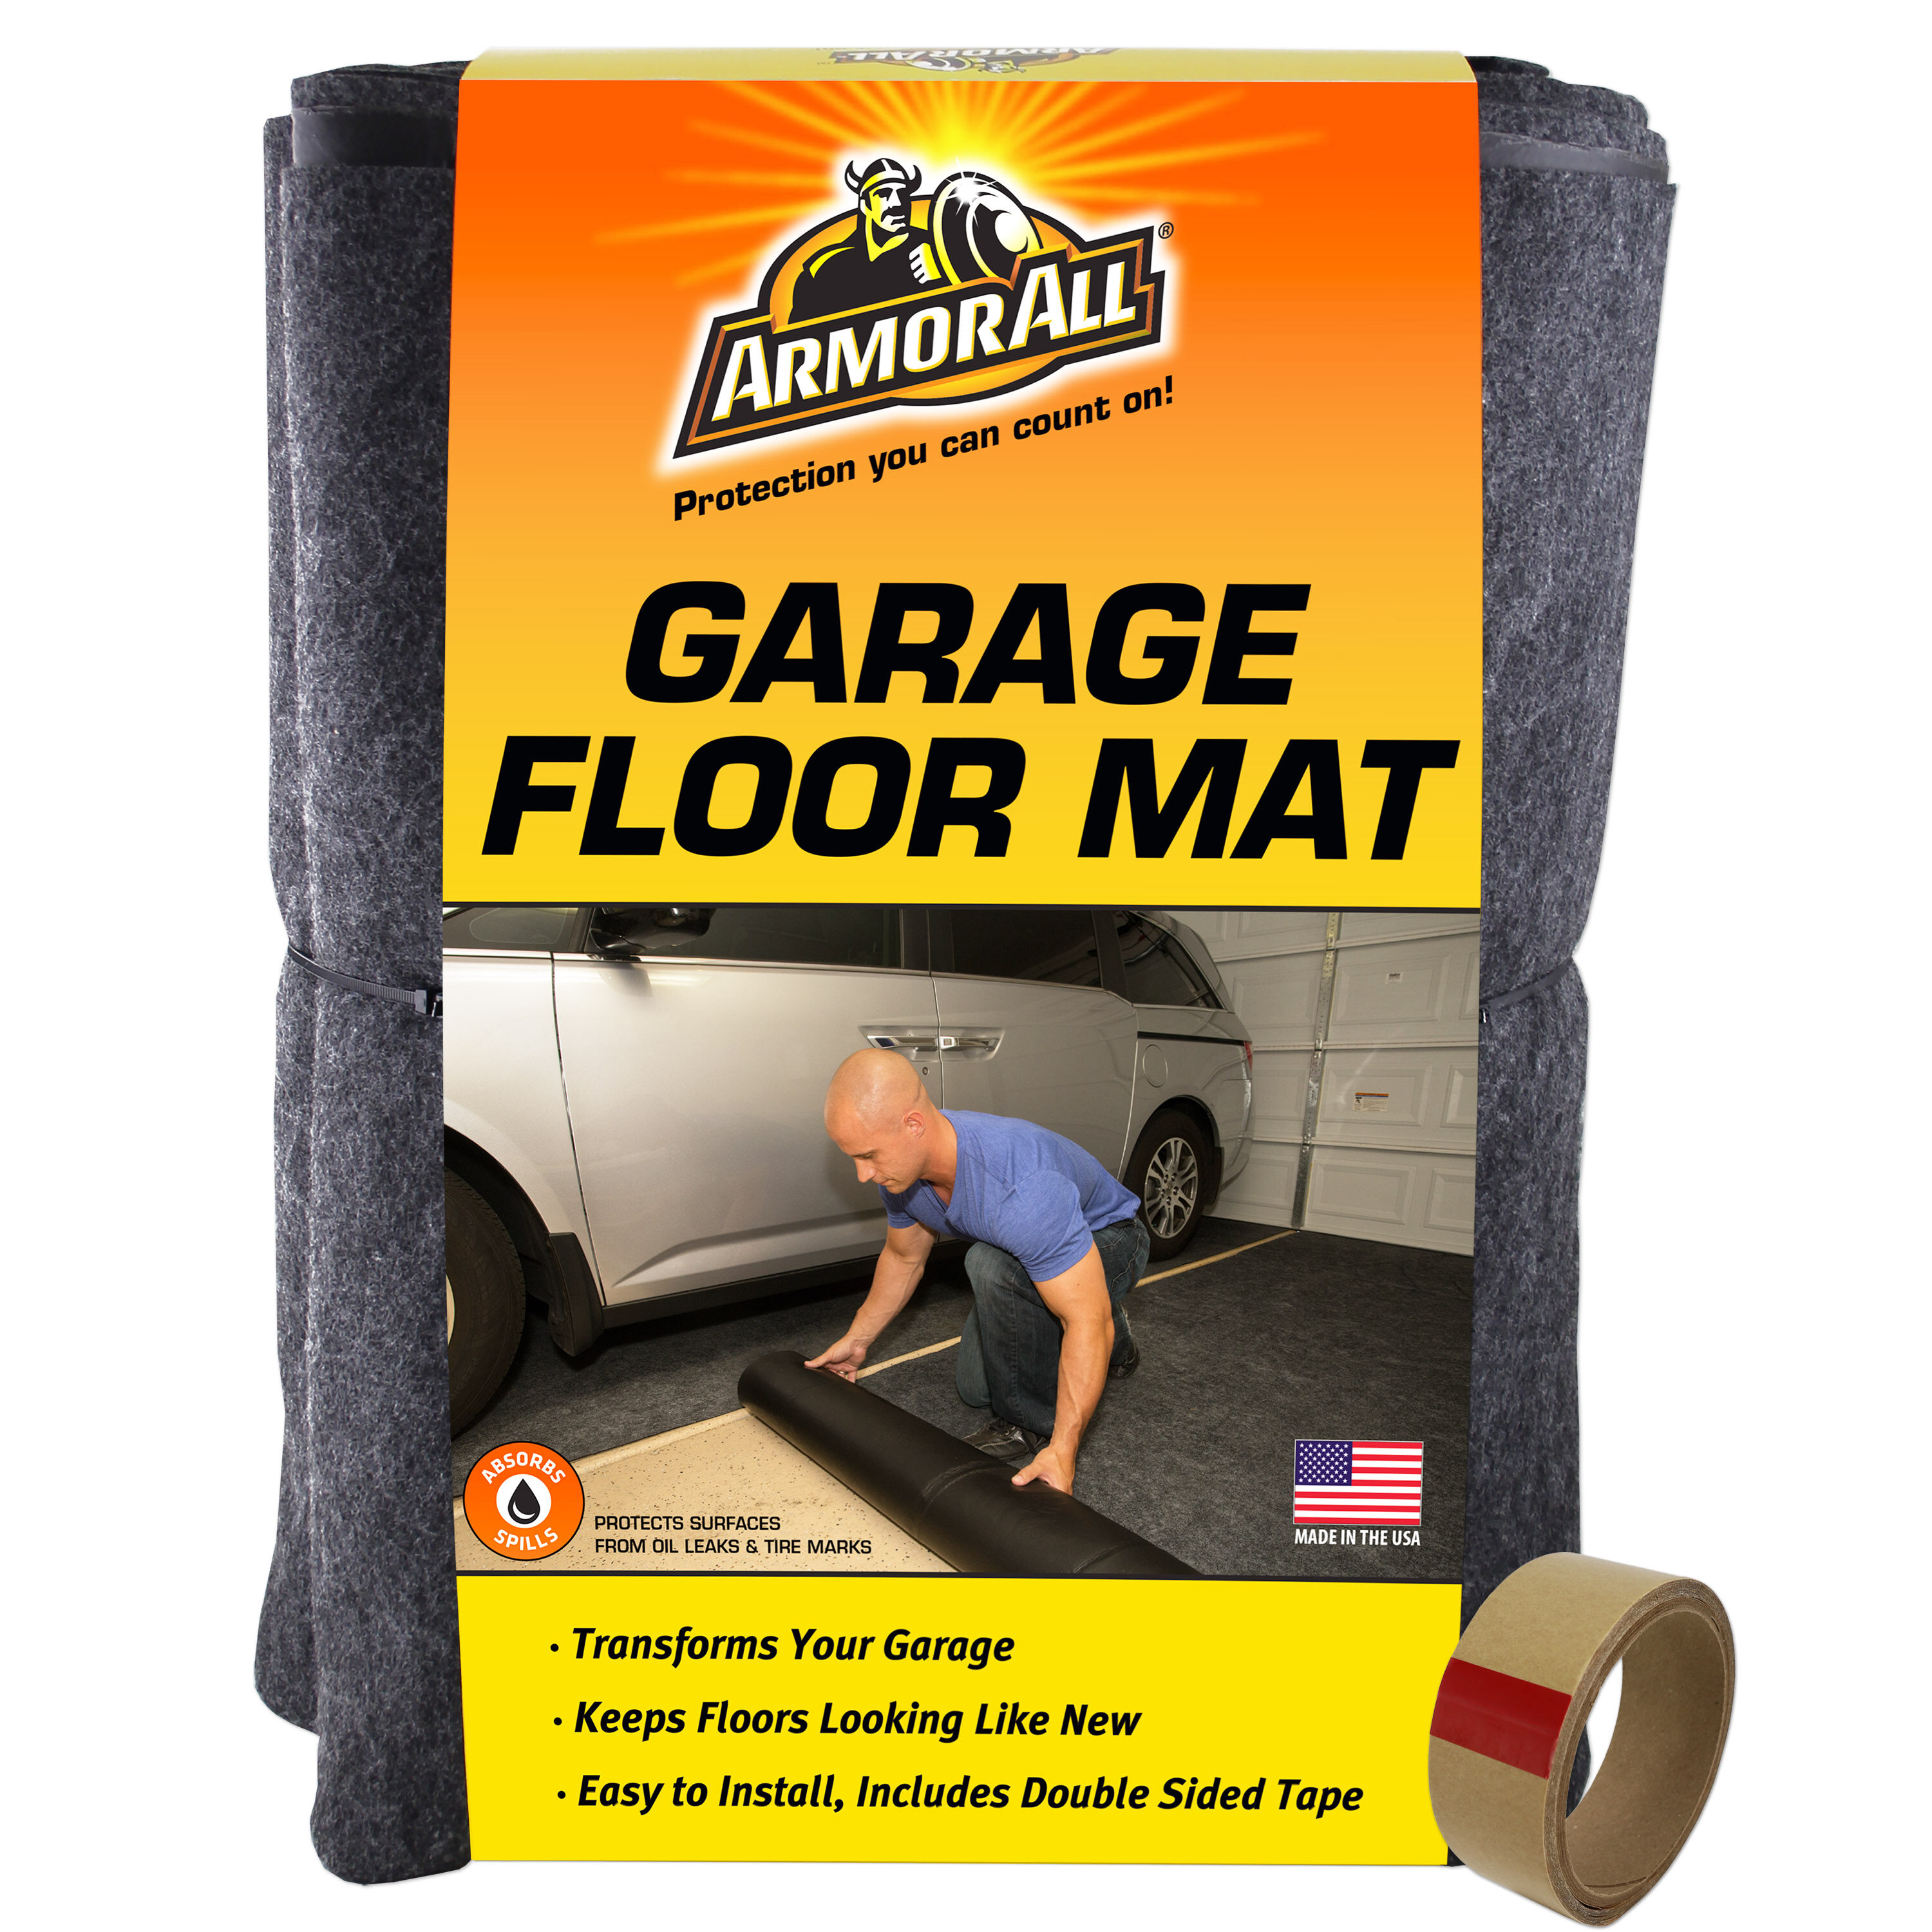 Armor All 22-ft x 8-5/6-ft x 130-mil T Polyester Garage Flooring Roll  (194.33-sq ft)